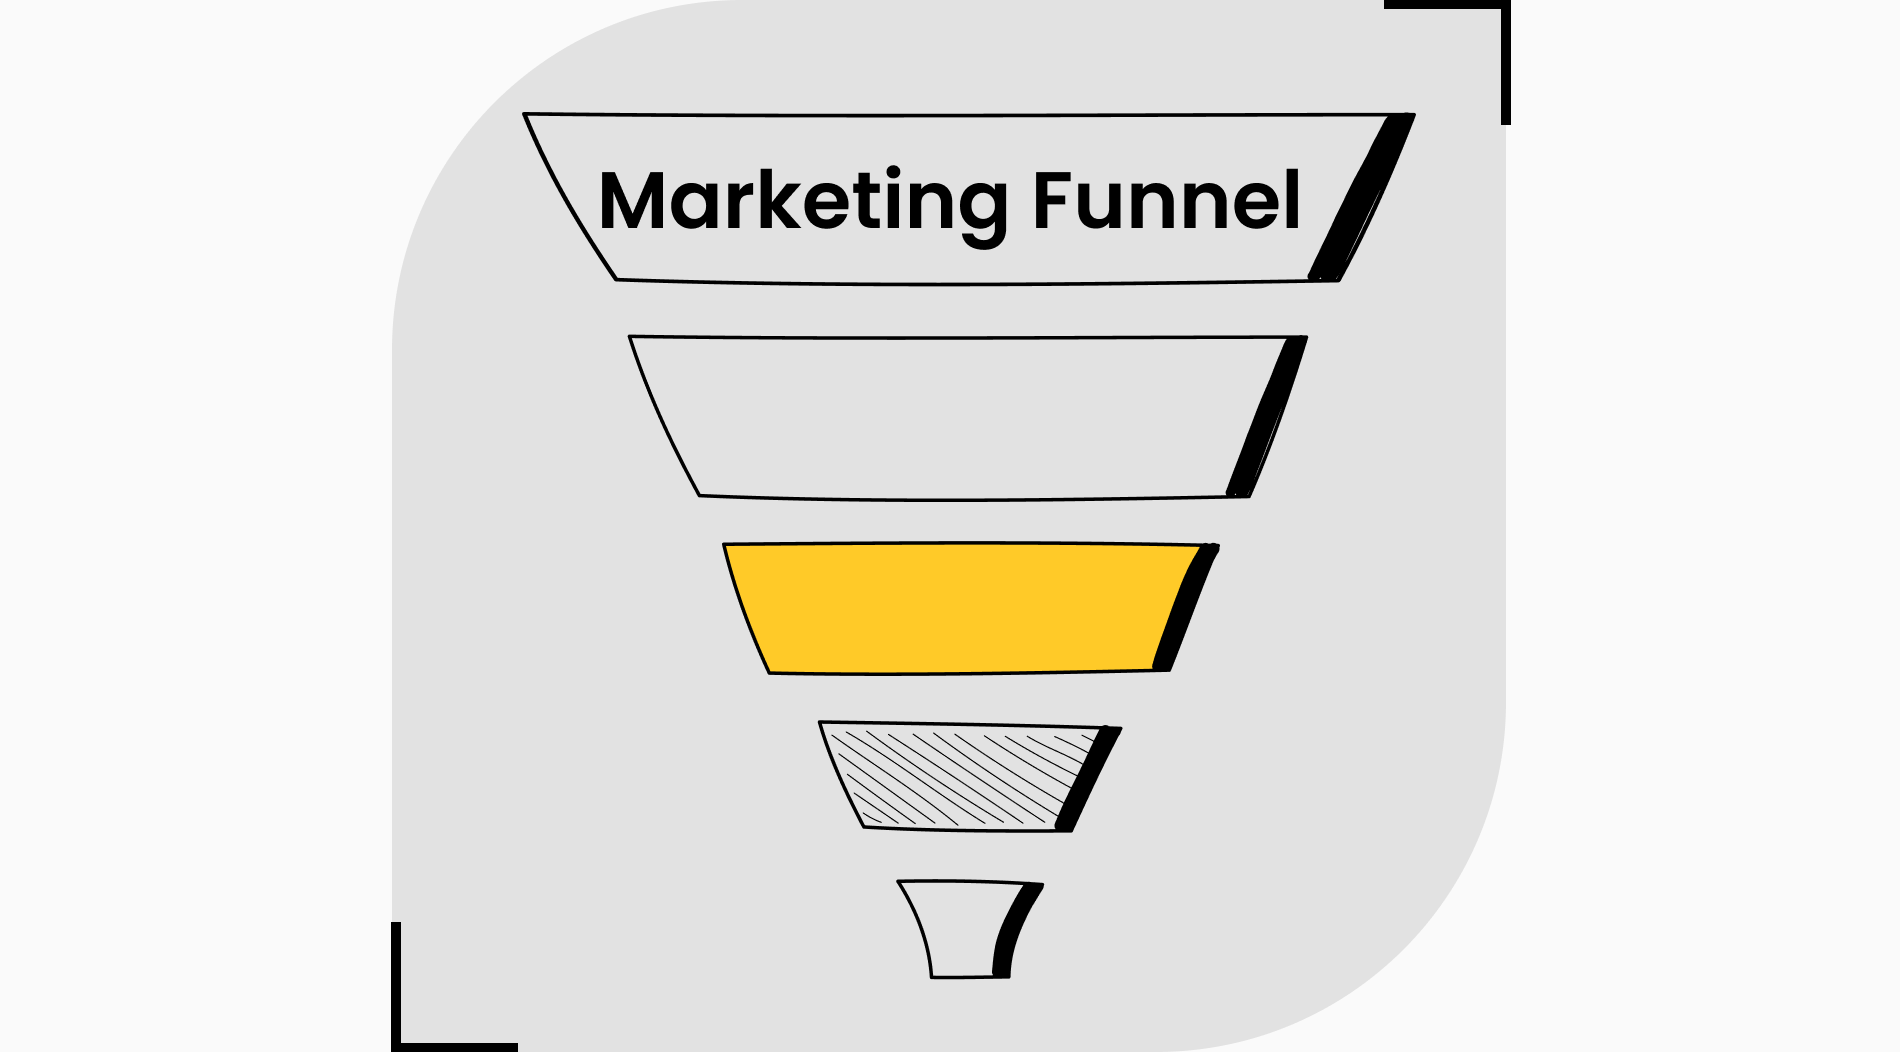 The Marketing Funnel: Definition, examples & how to use